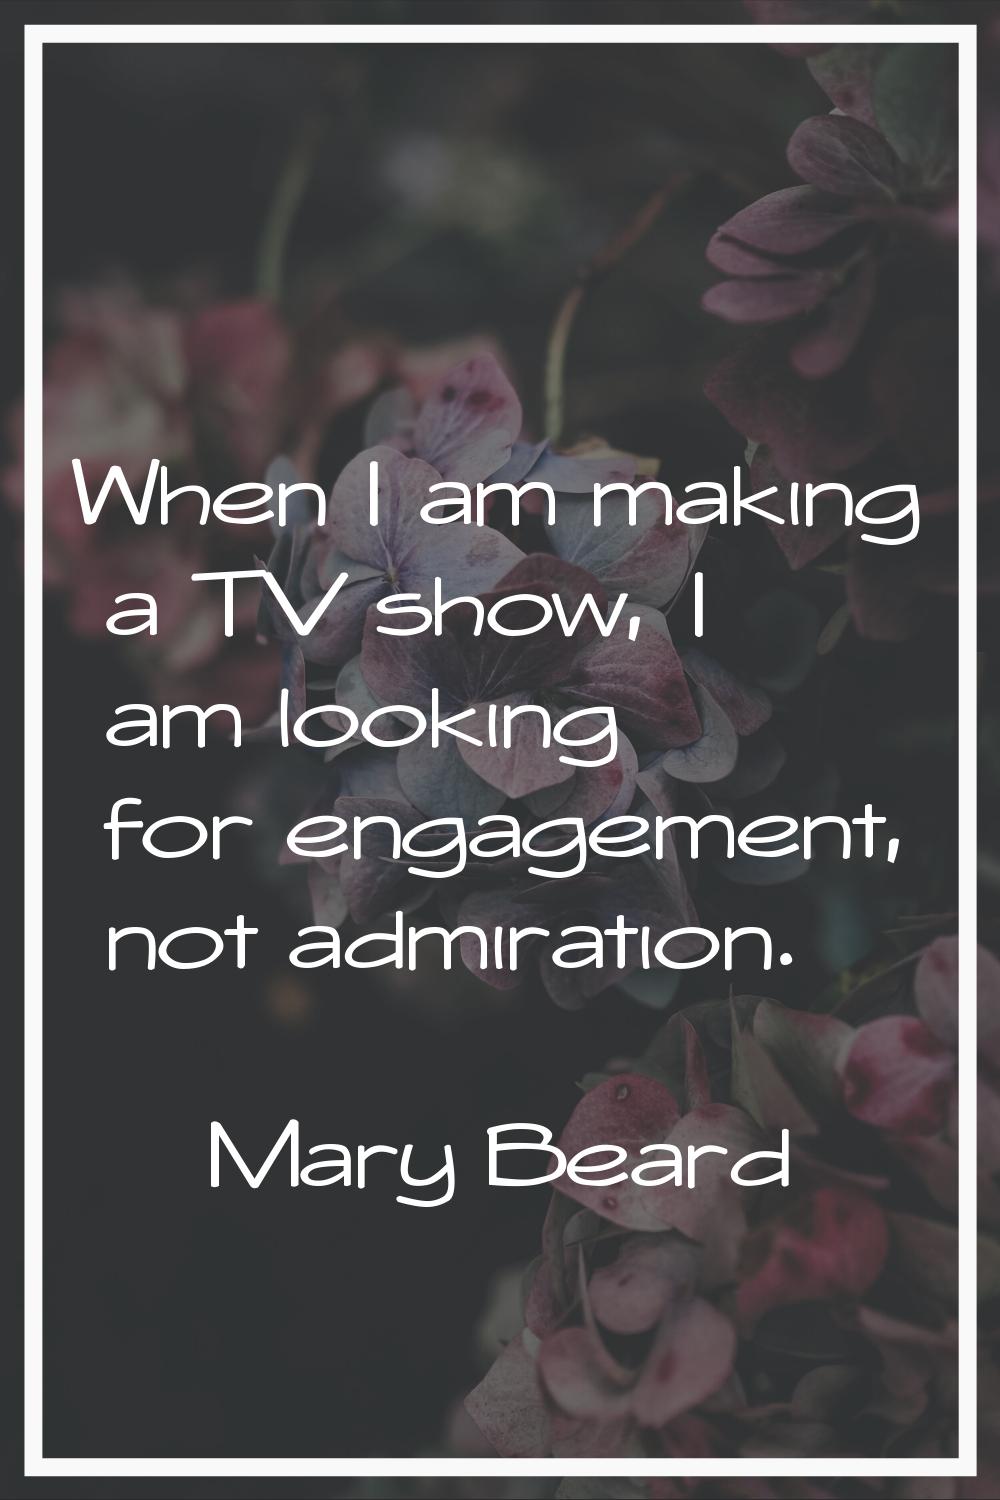 When I am making a TV show, I am looking for engagement, not admiration.